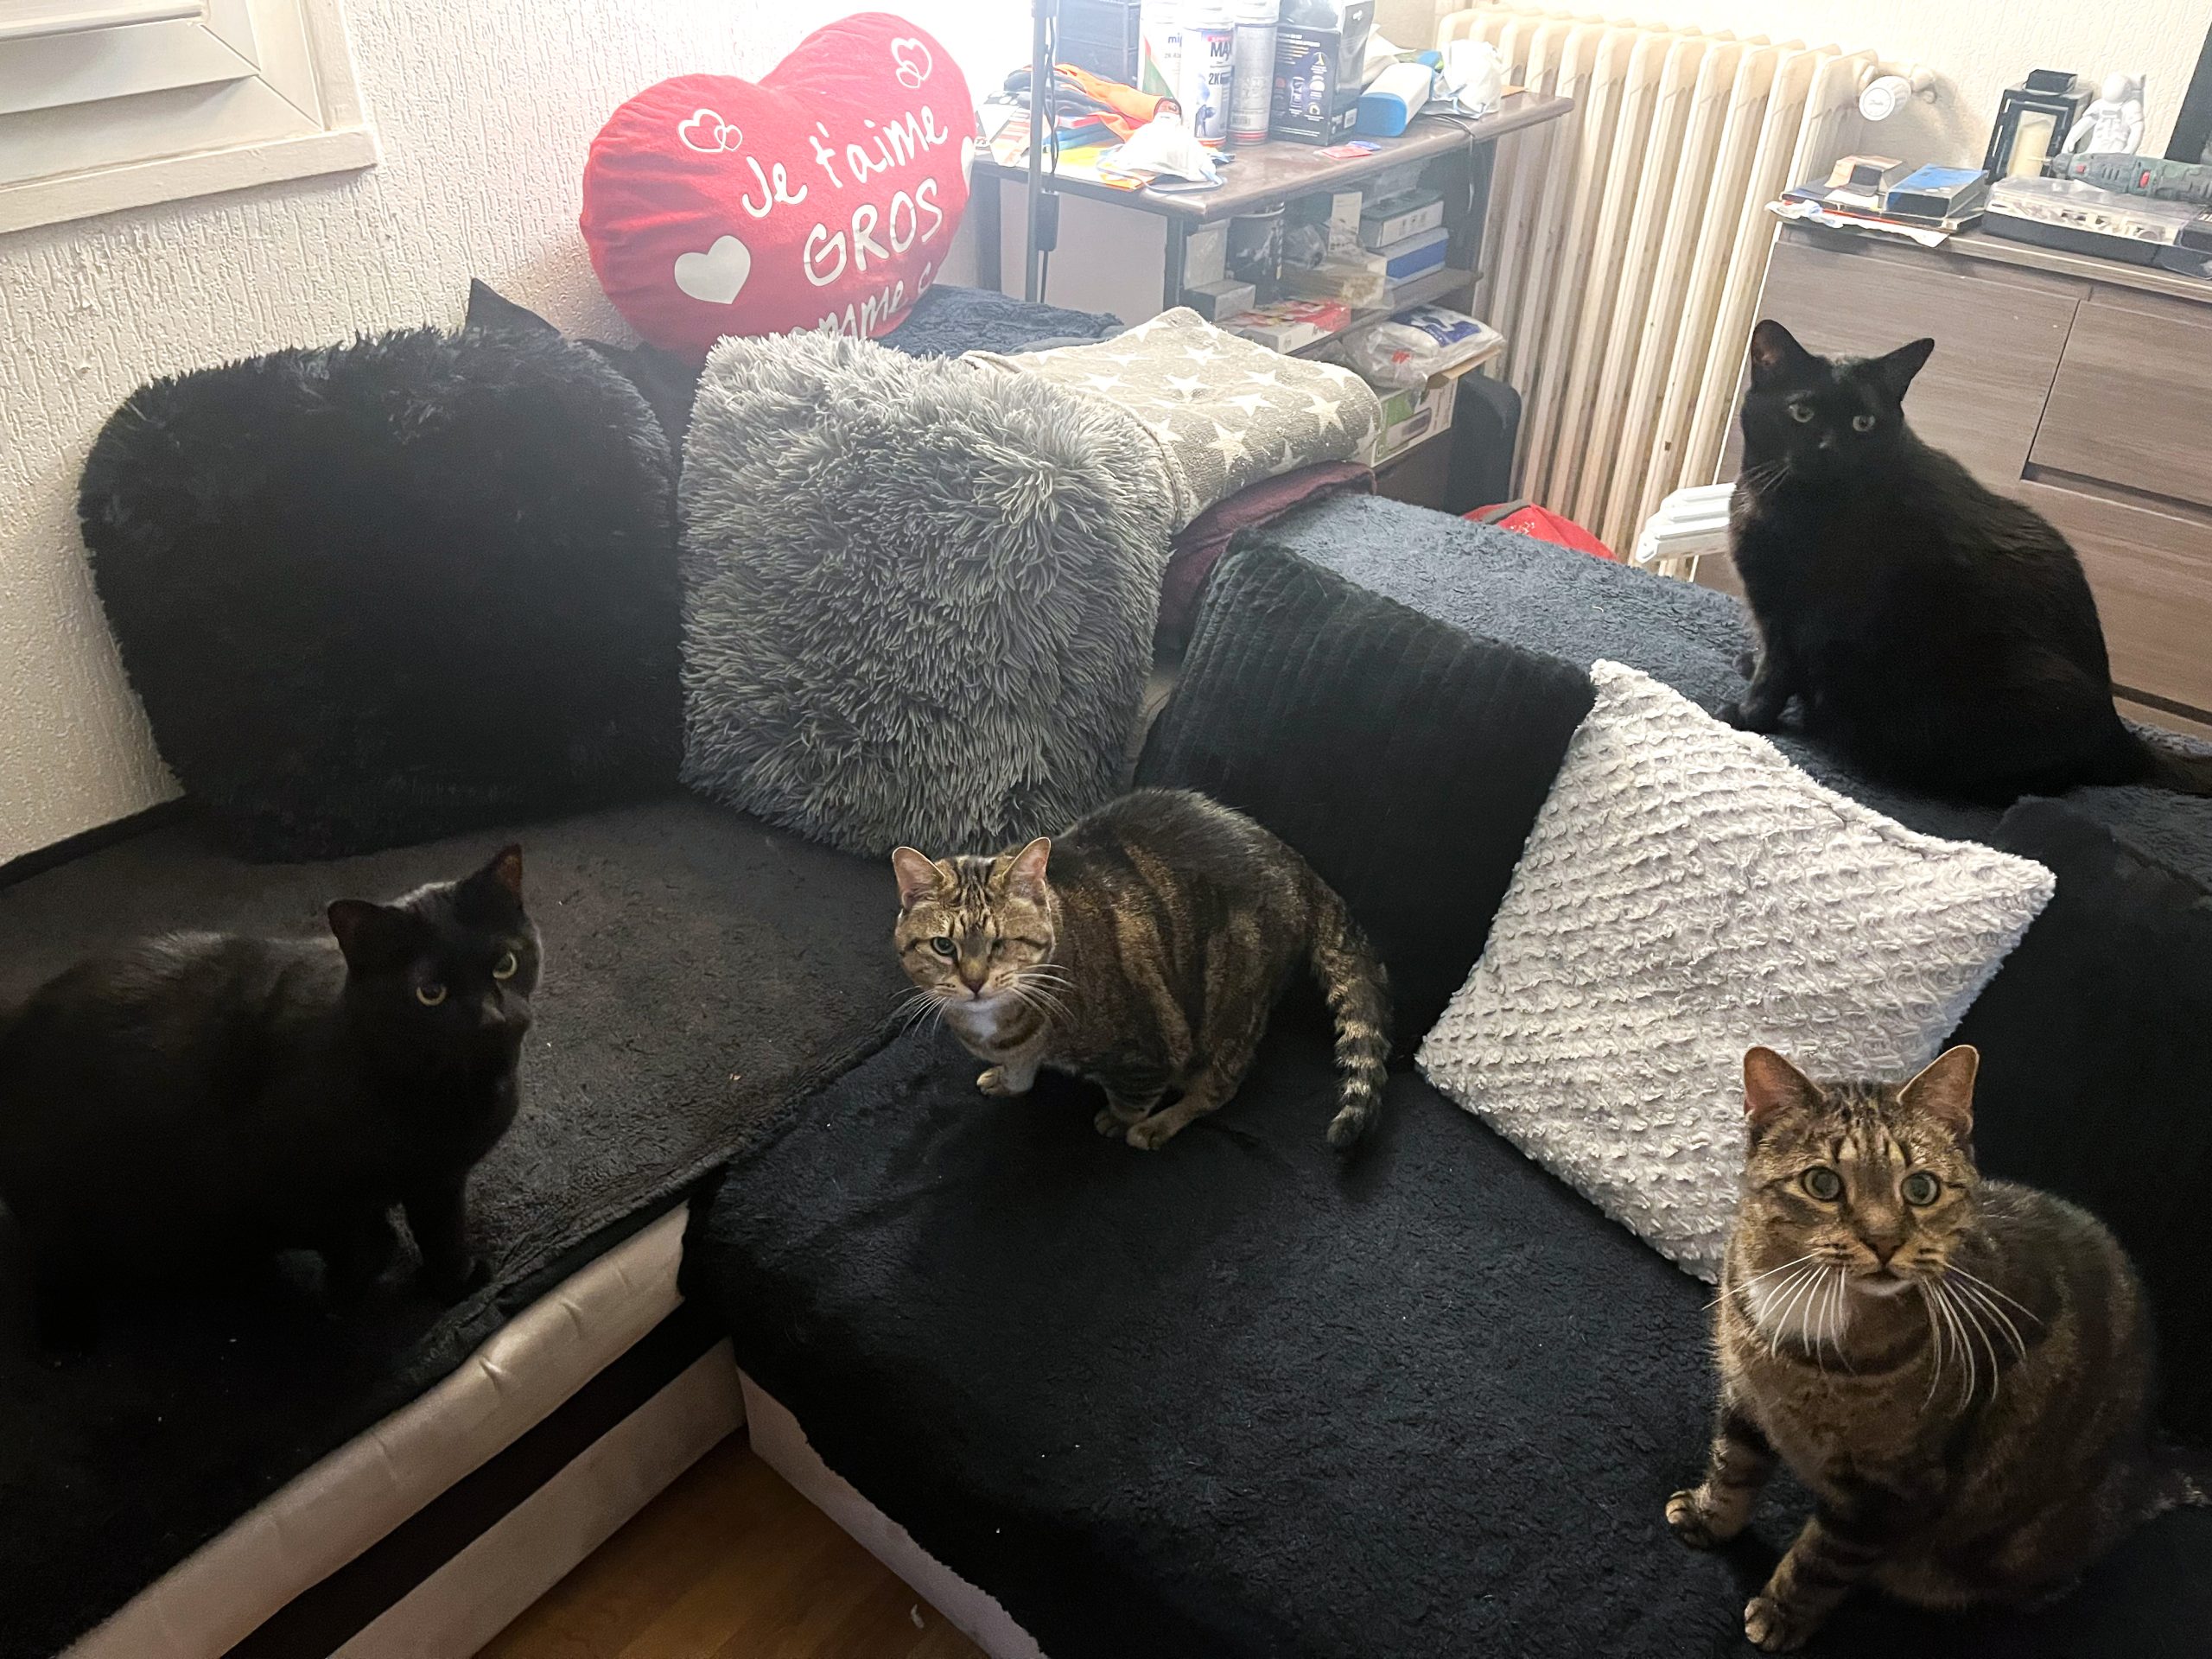 Four cats sit on a couch, two are black and two are brown stripped.